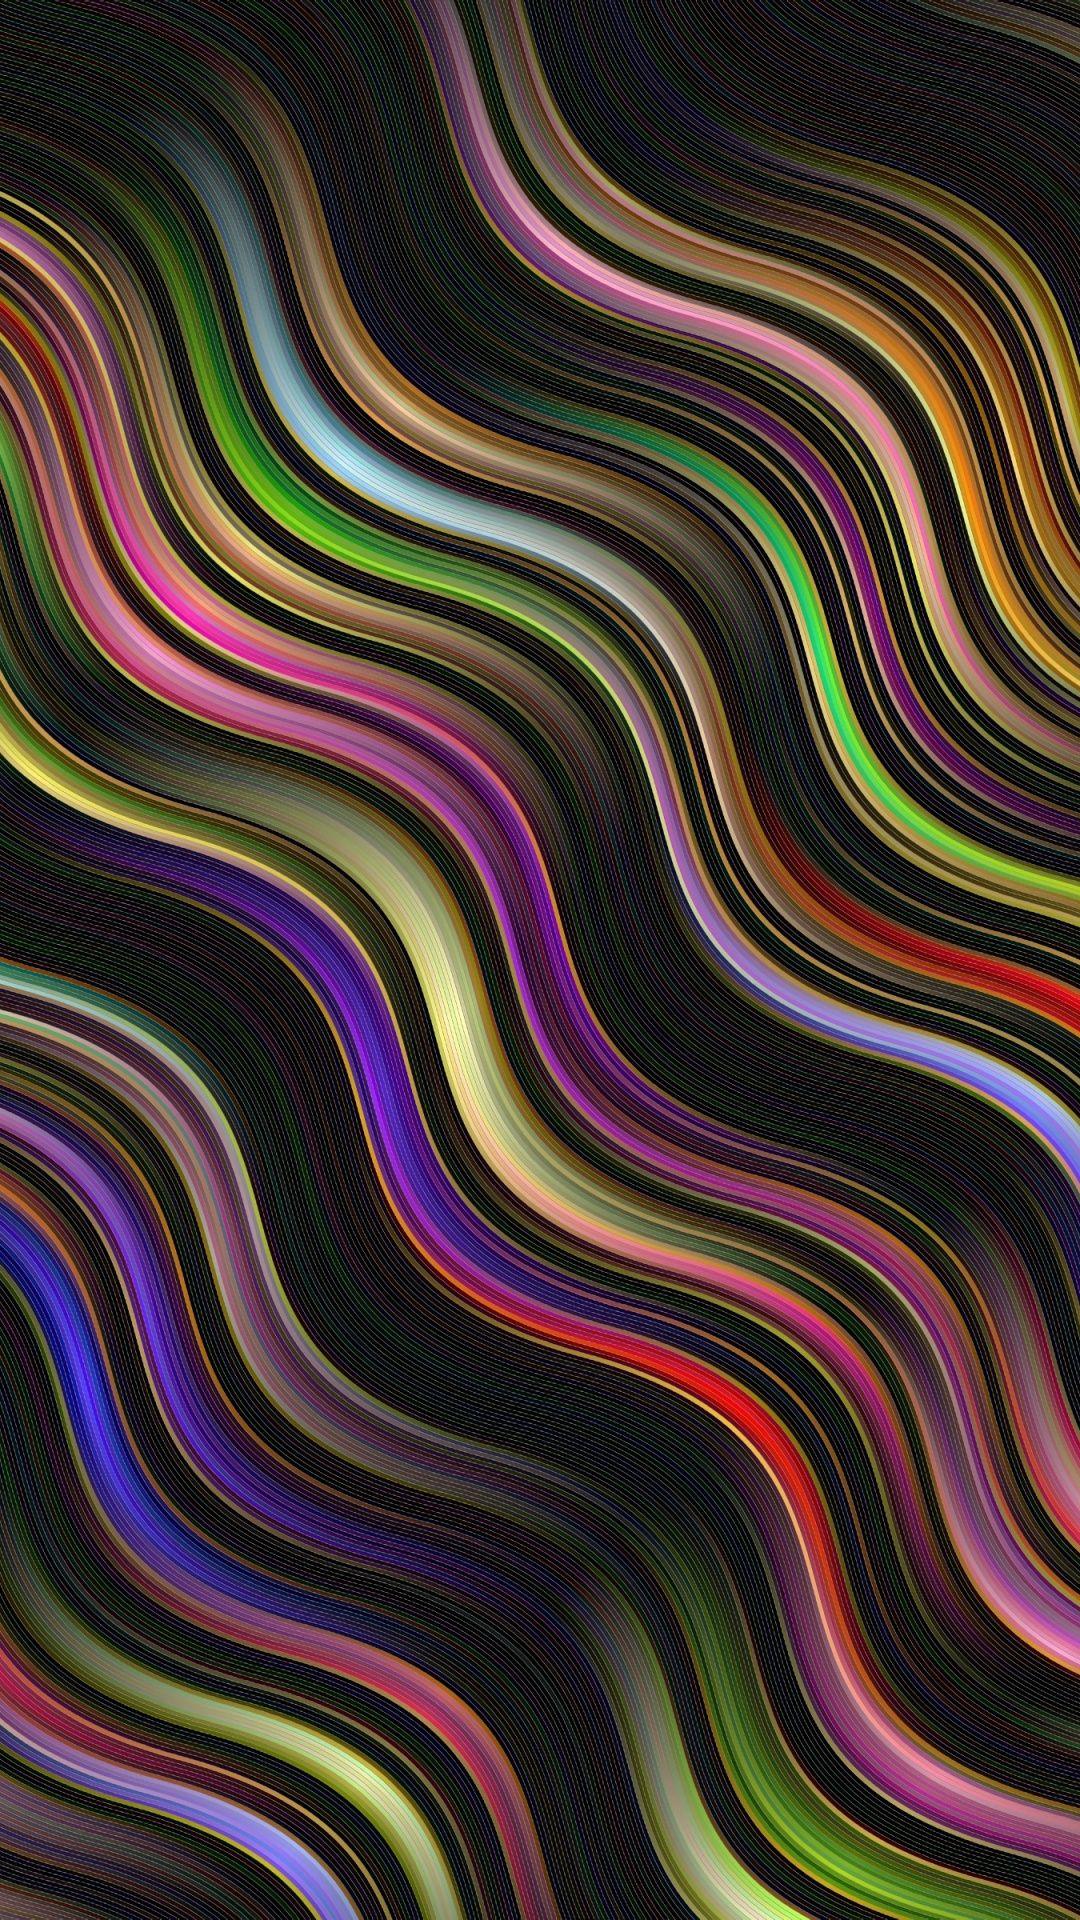 Wavy lines, illusion, colorful, stripes, 1080x1920 wallpaper